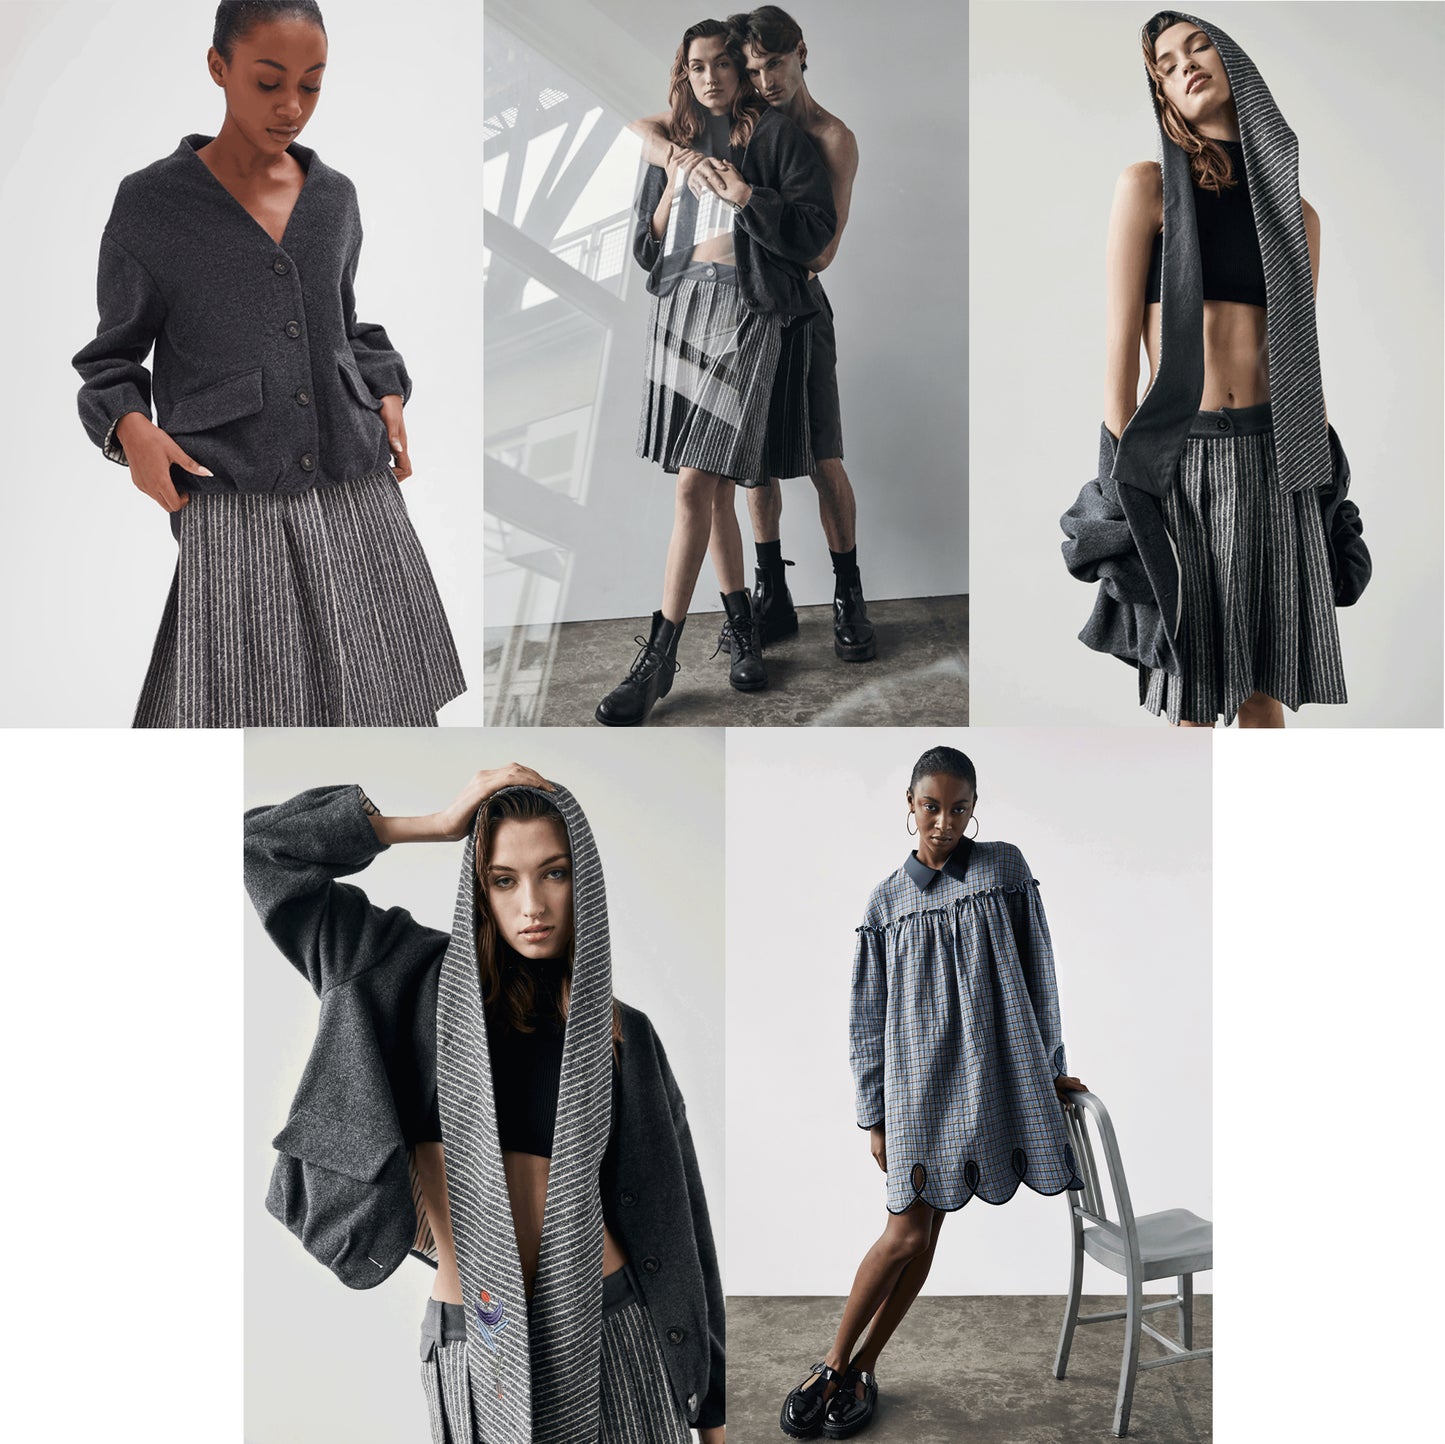 NISH NICHE settles a Winter Elegance with "GRAVITY" Collection